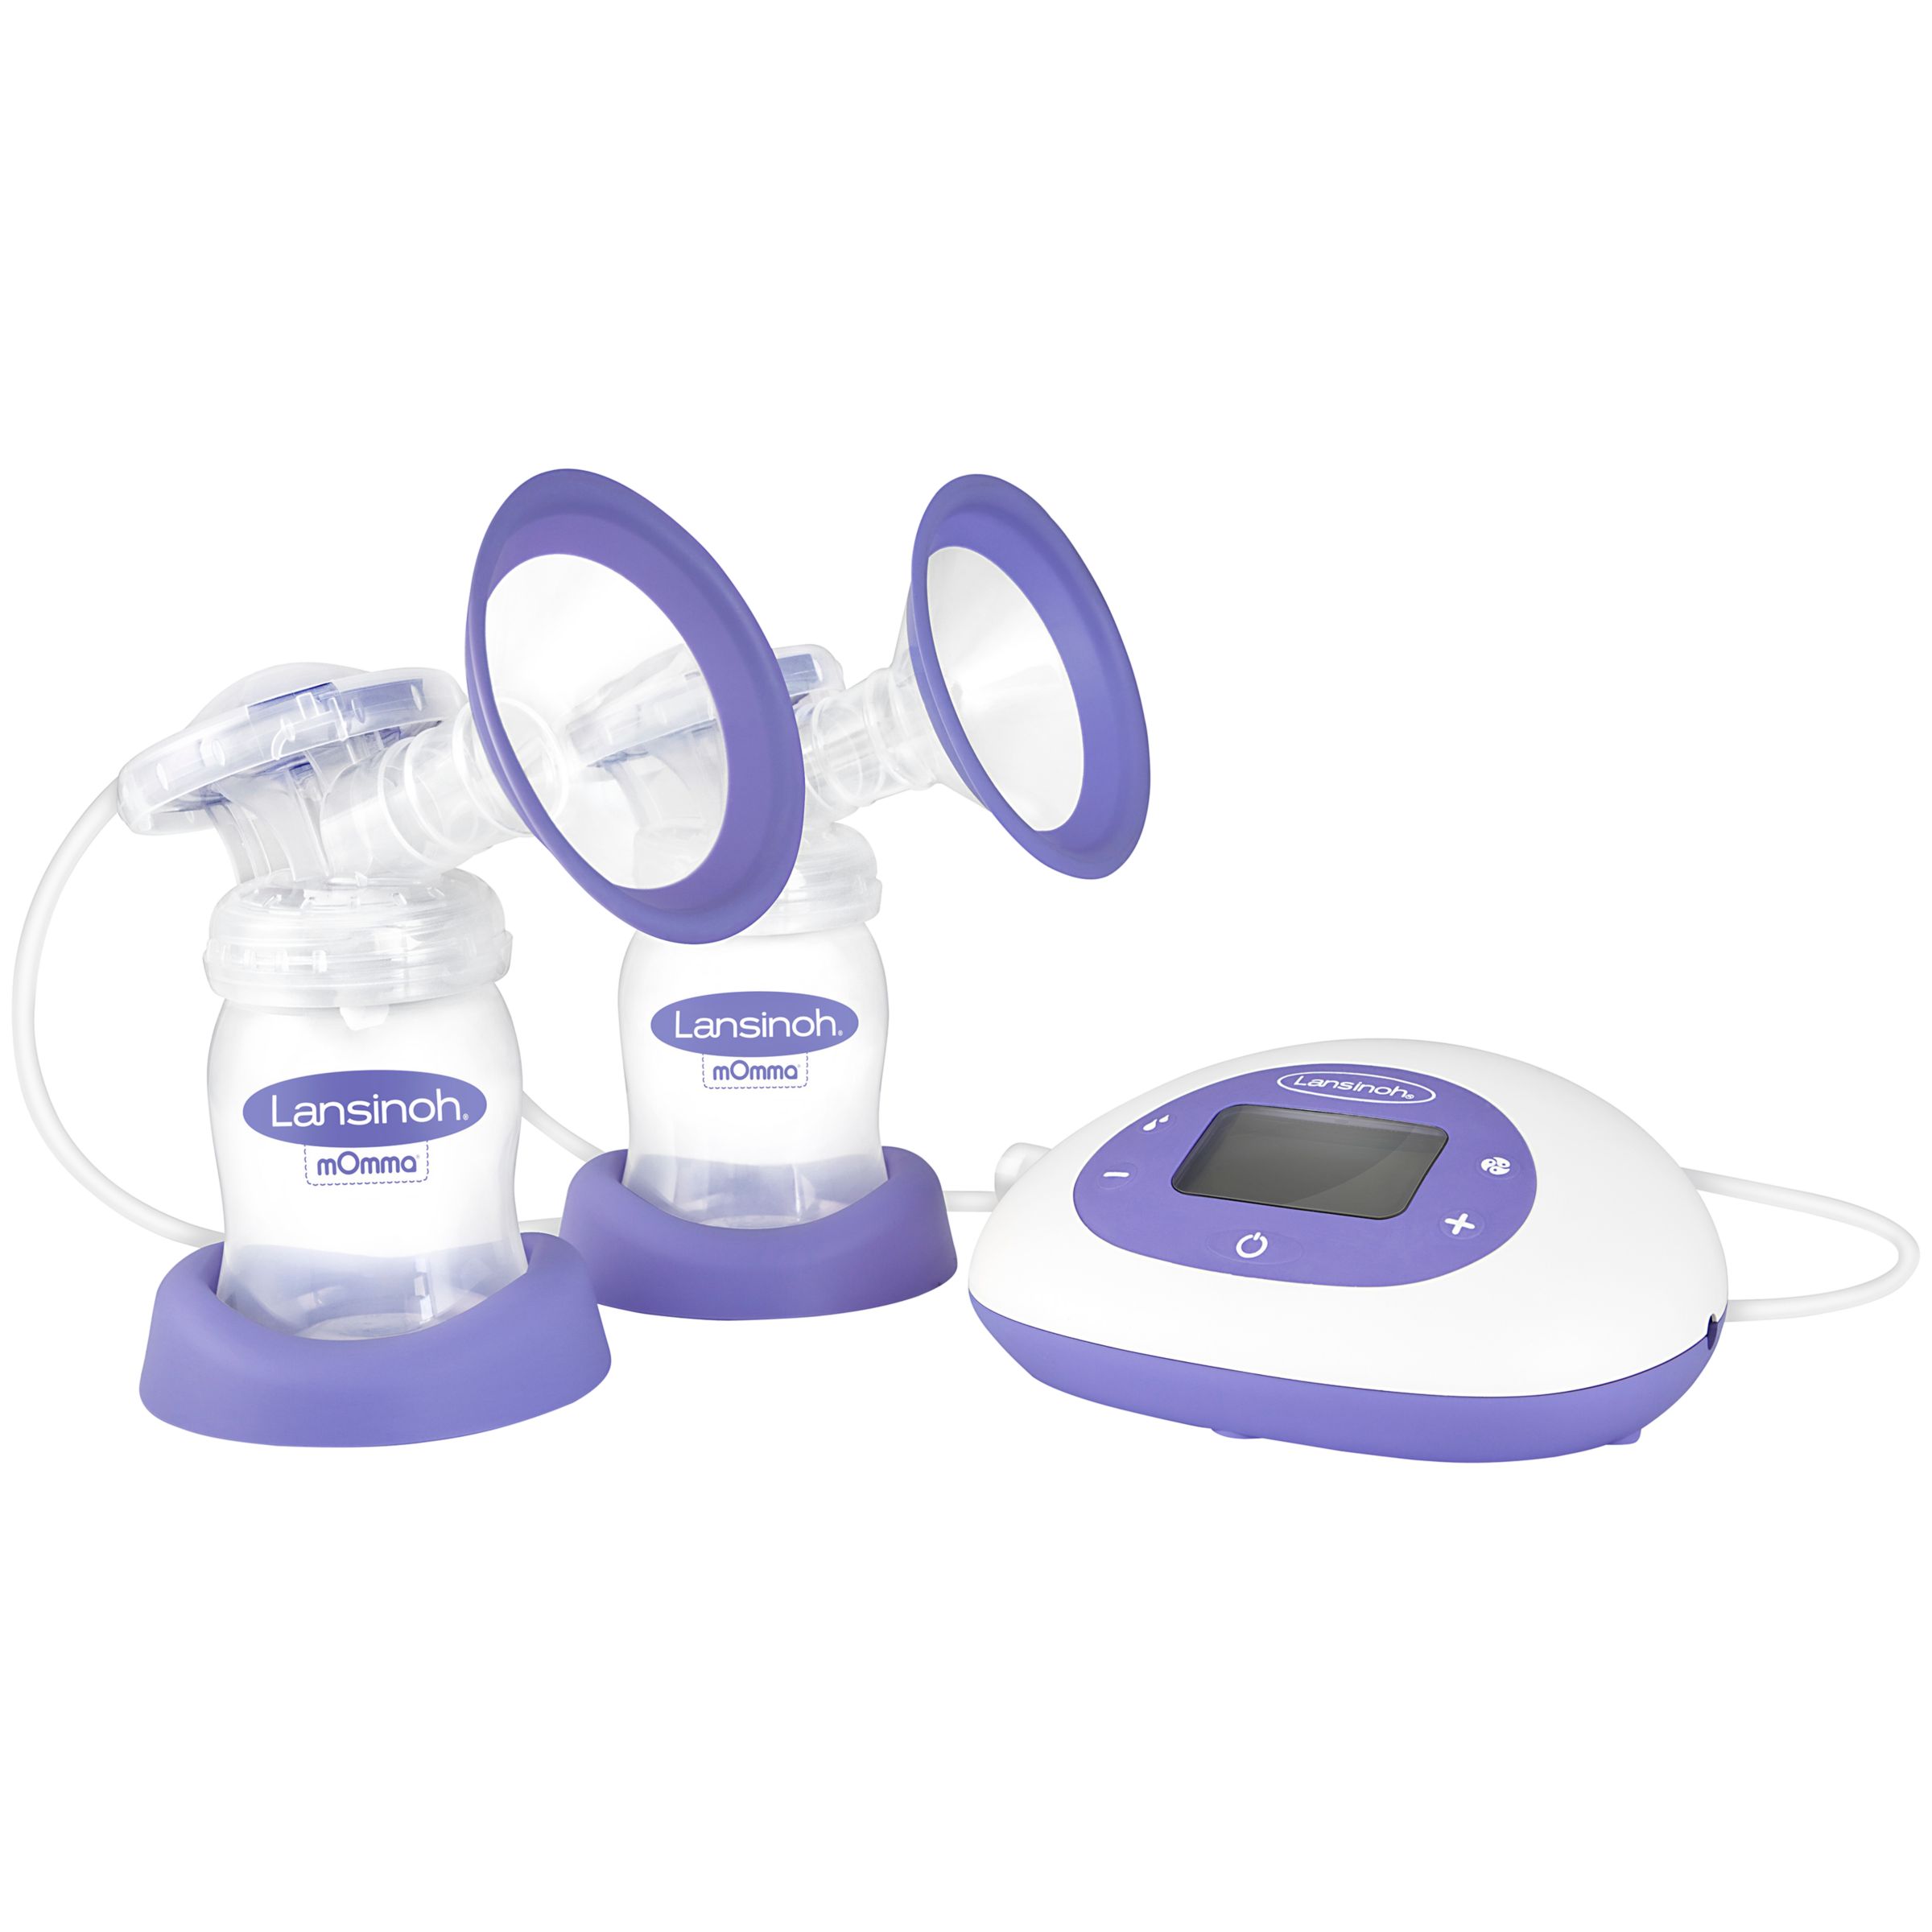 Image of Lansinoh 2in1 Double Electric Breast Pump